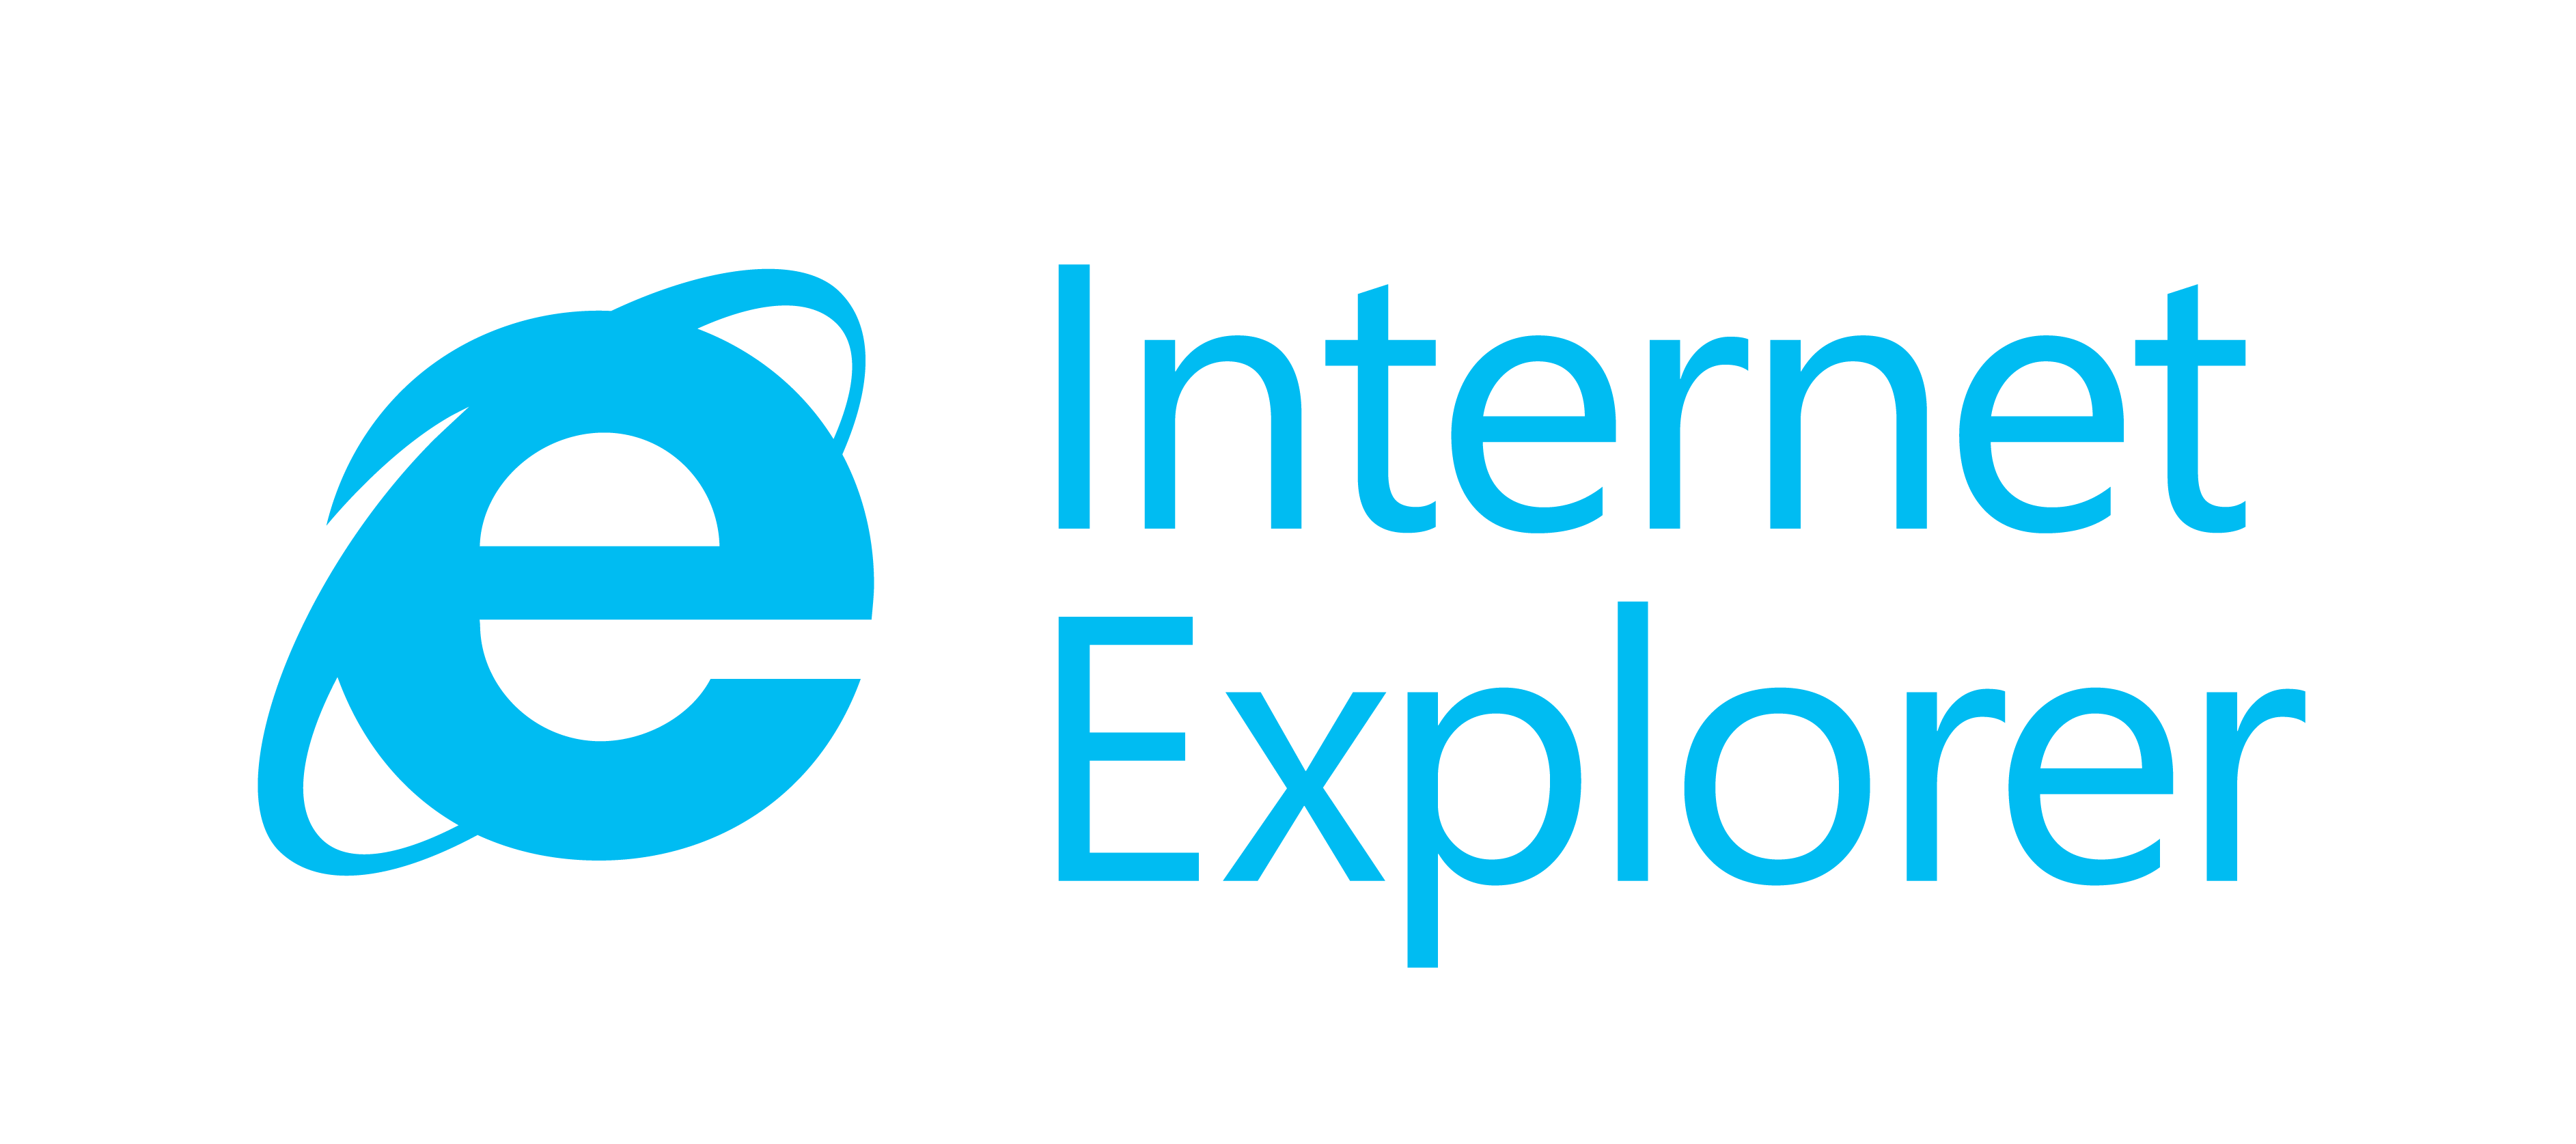 IE6 Logo - Adblock Plus Drops Support for IE6 and IE7